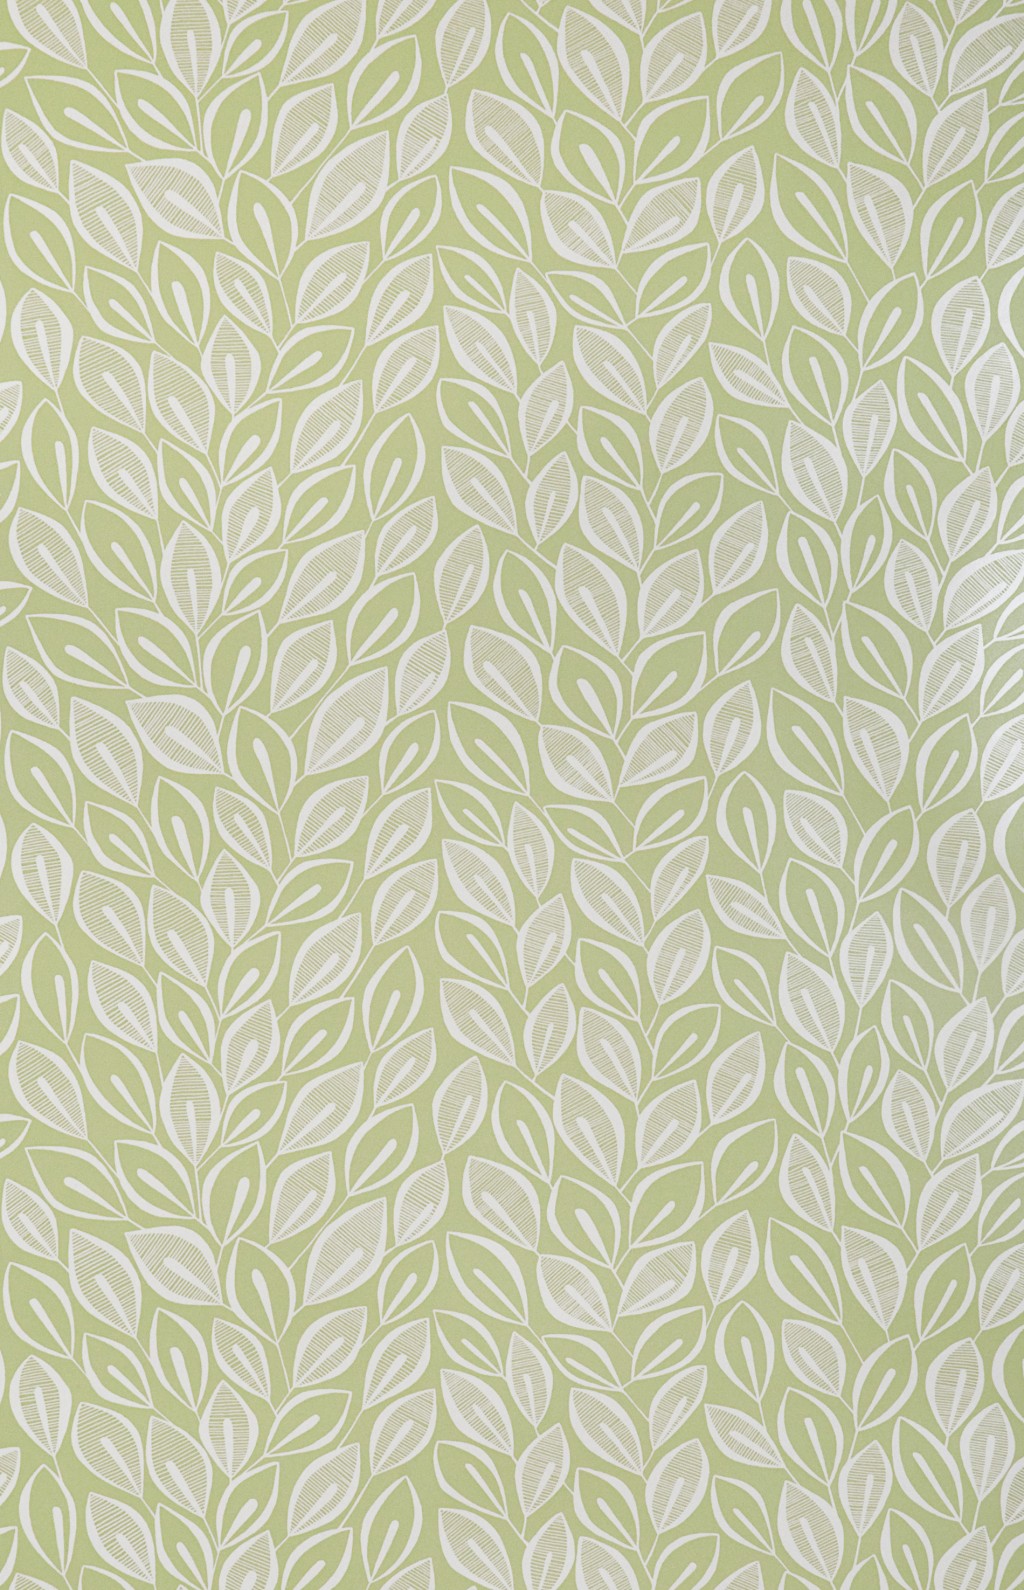 Leaves Absinthe With White Wallpaper